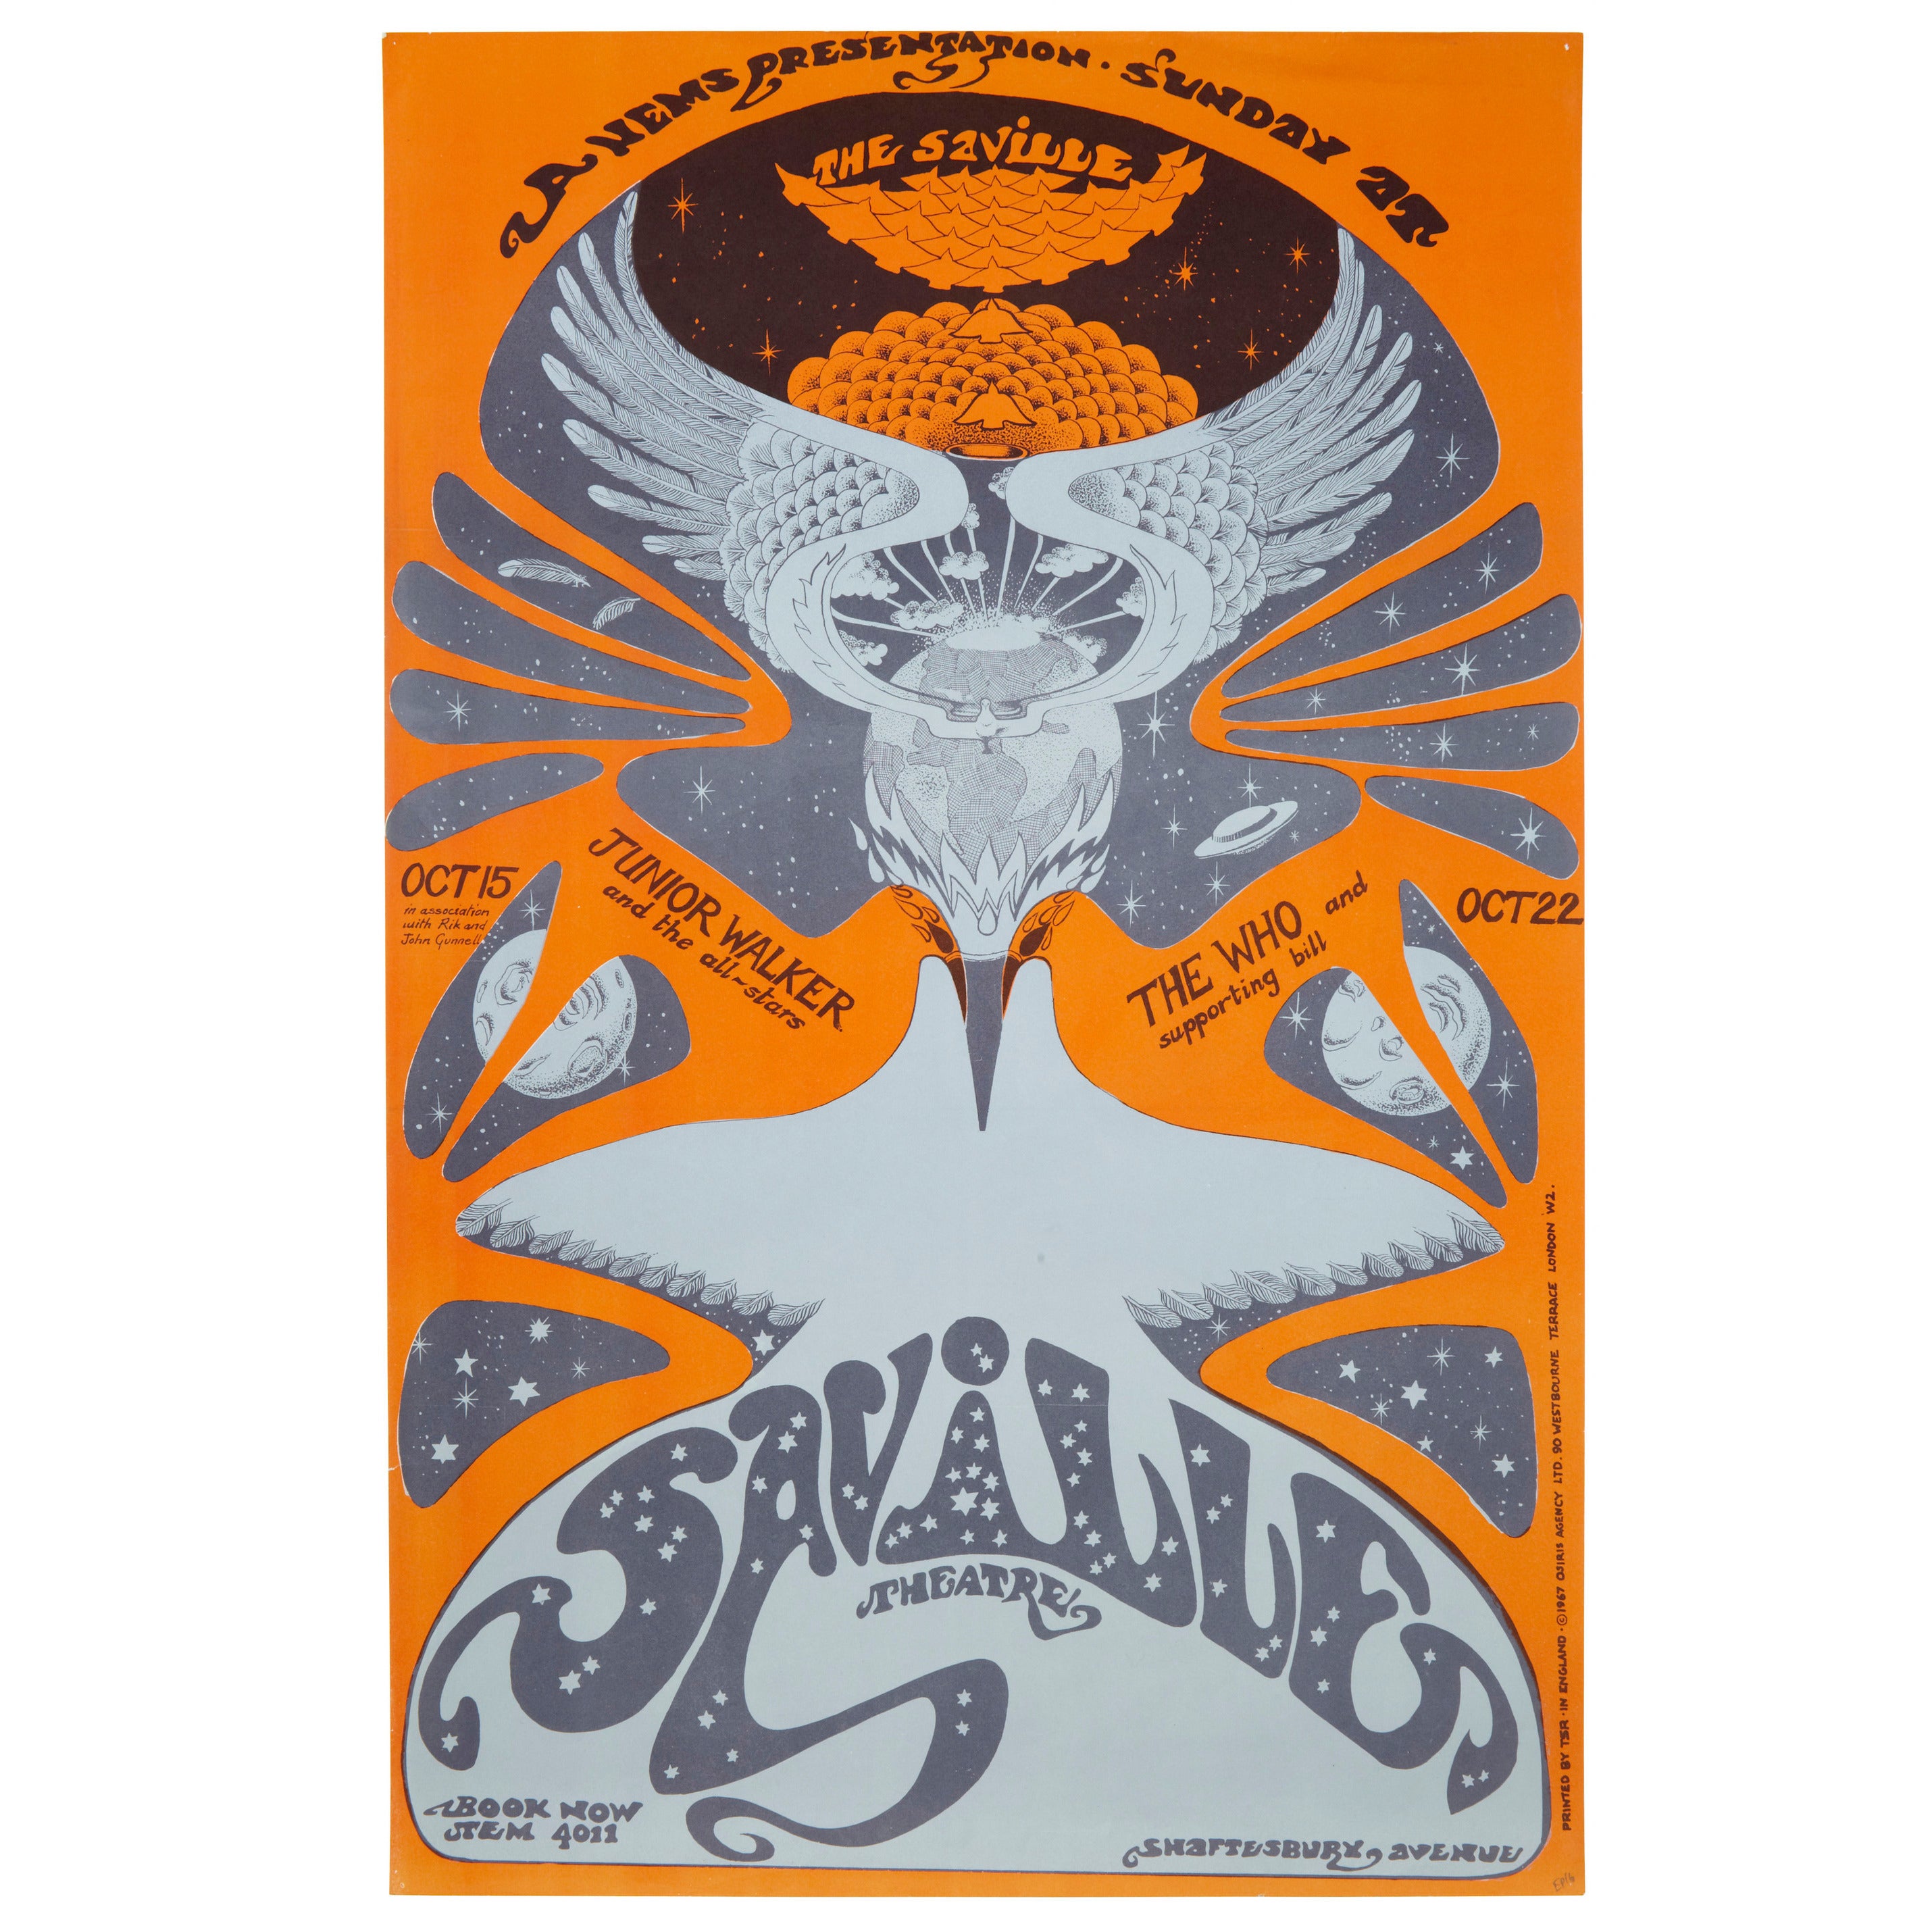 Rare Original Psychedelic Who Concert Poster at The Saville 1967